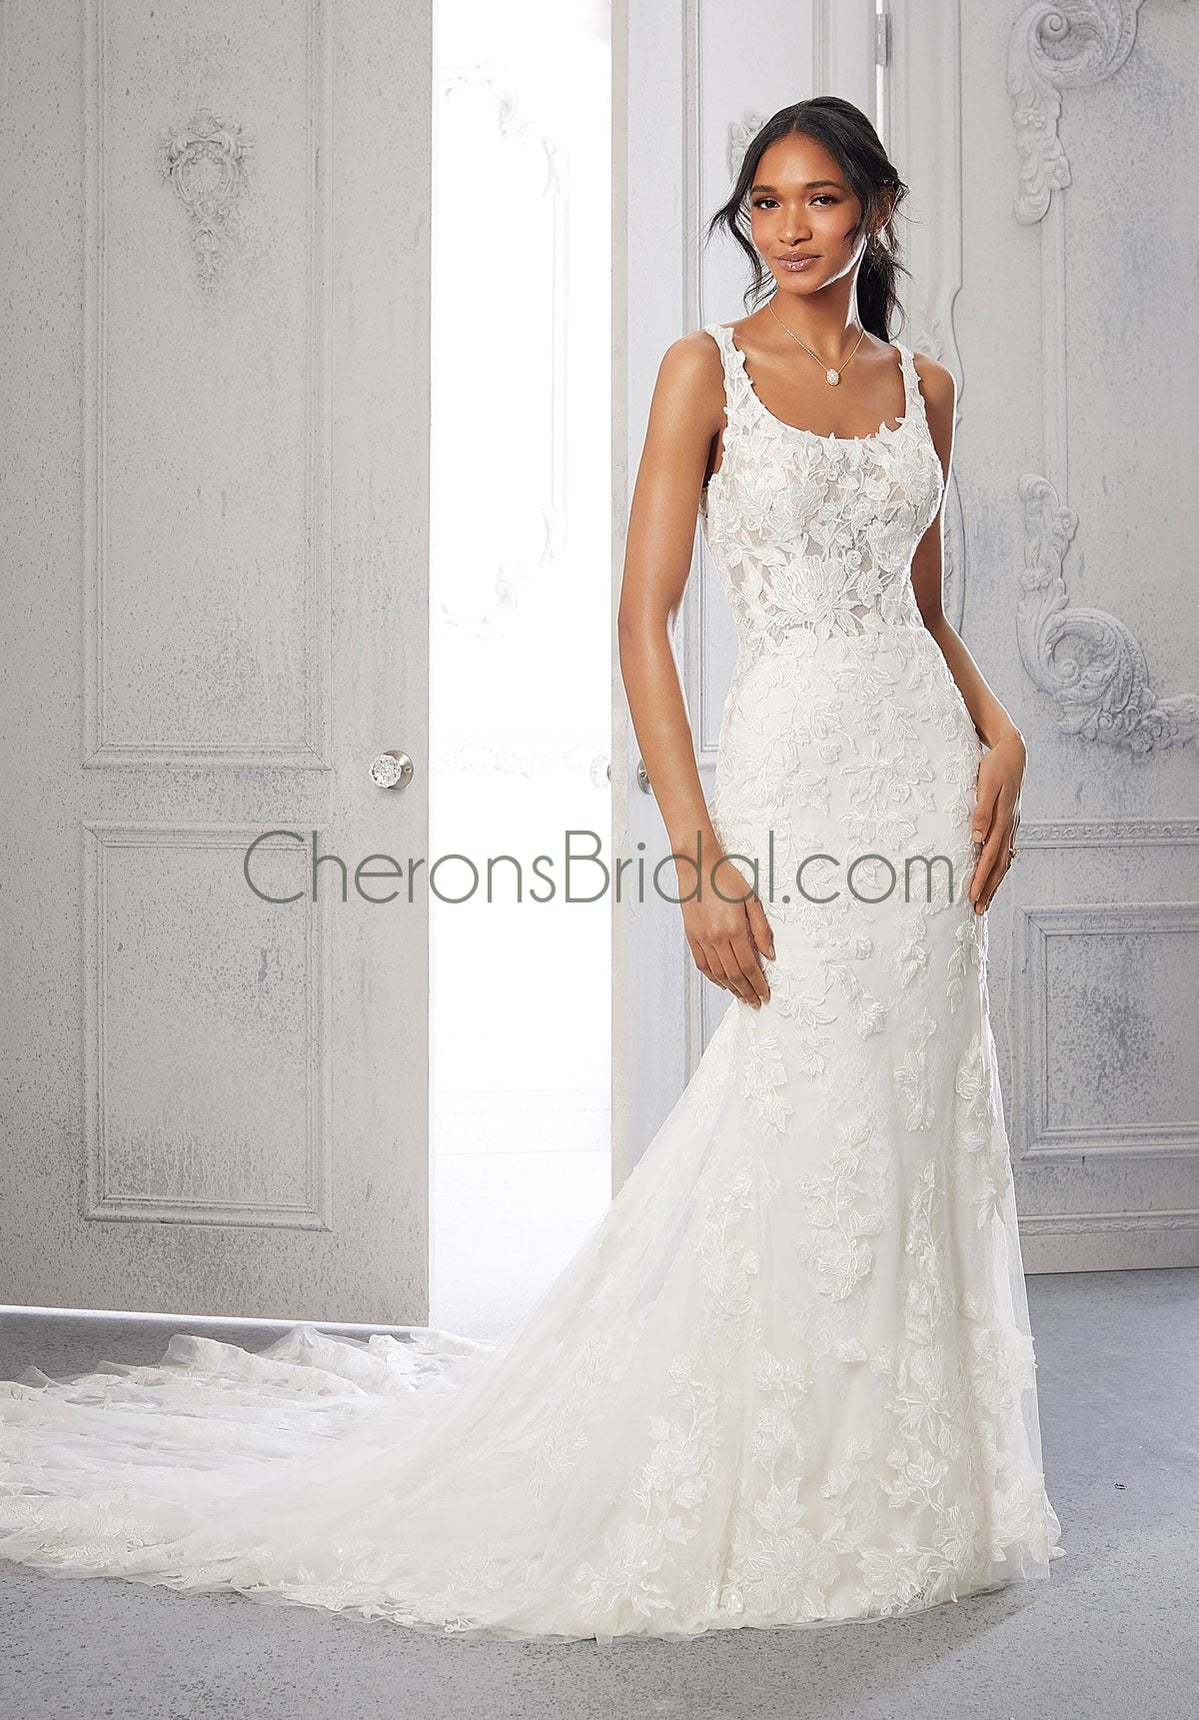 Morilee - 2369 - Carine - Cheron's Bridal, Wedding Gown - Morilee Line - - Wedding Gowns Dresses Chattanooga Hixson Shops Boutiques Tennessee TN Georgia GA MSRP Lowest Prices Sale Discount